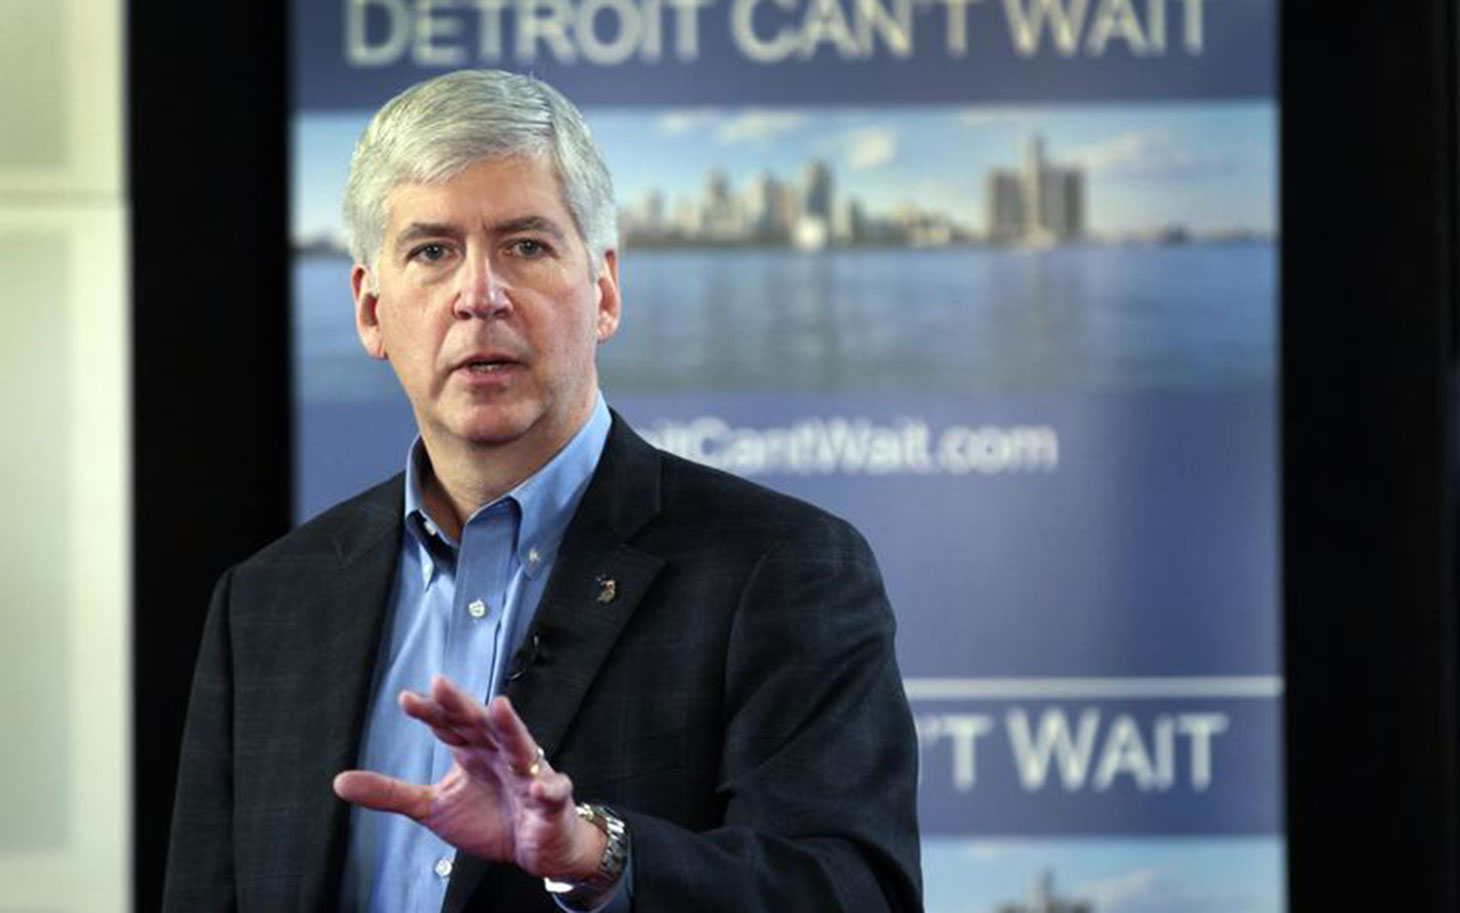 Michigan Governor Rick Snyder is trying to consolidate control over Detroit's charters.